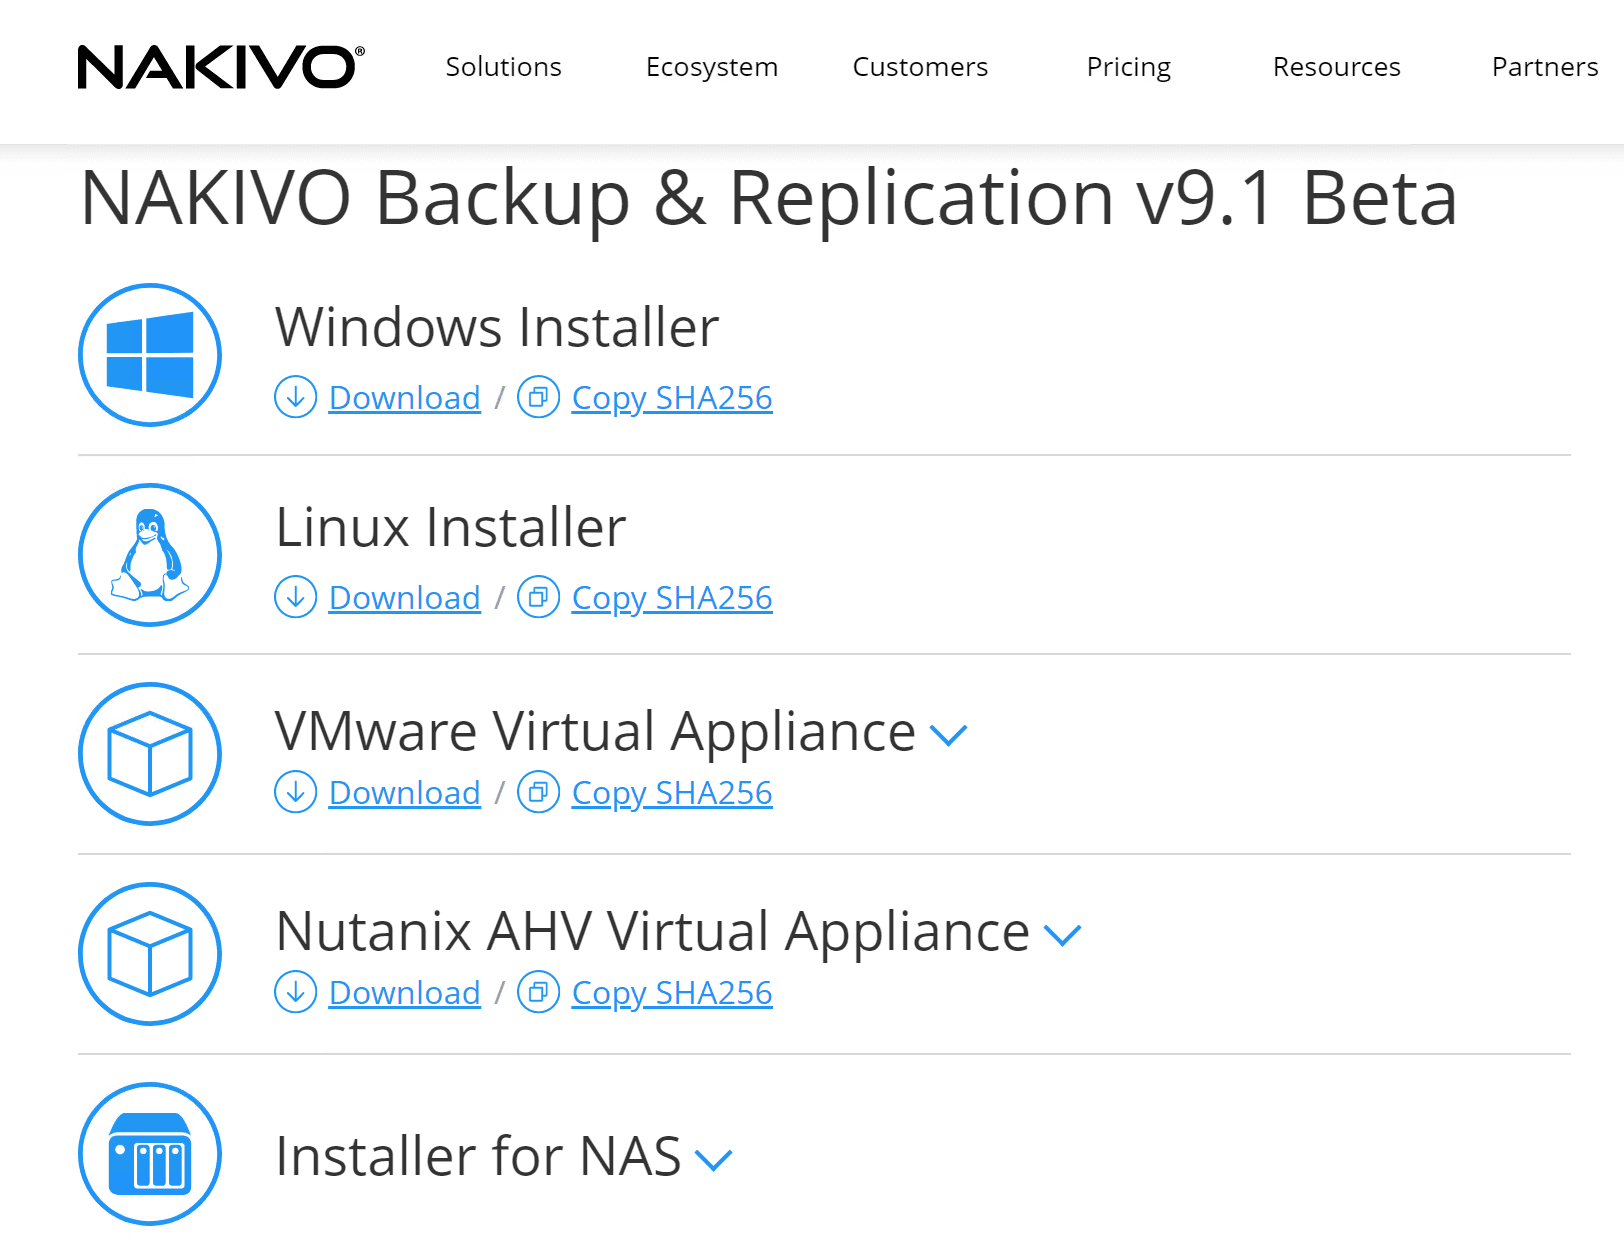 NAKIVO-Backup-and-Replication-v9.1-Beta-Released-New-Features